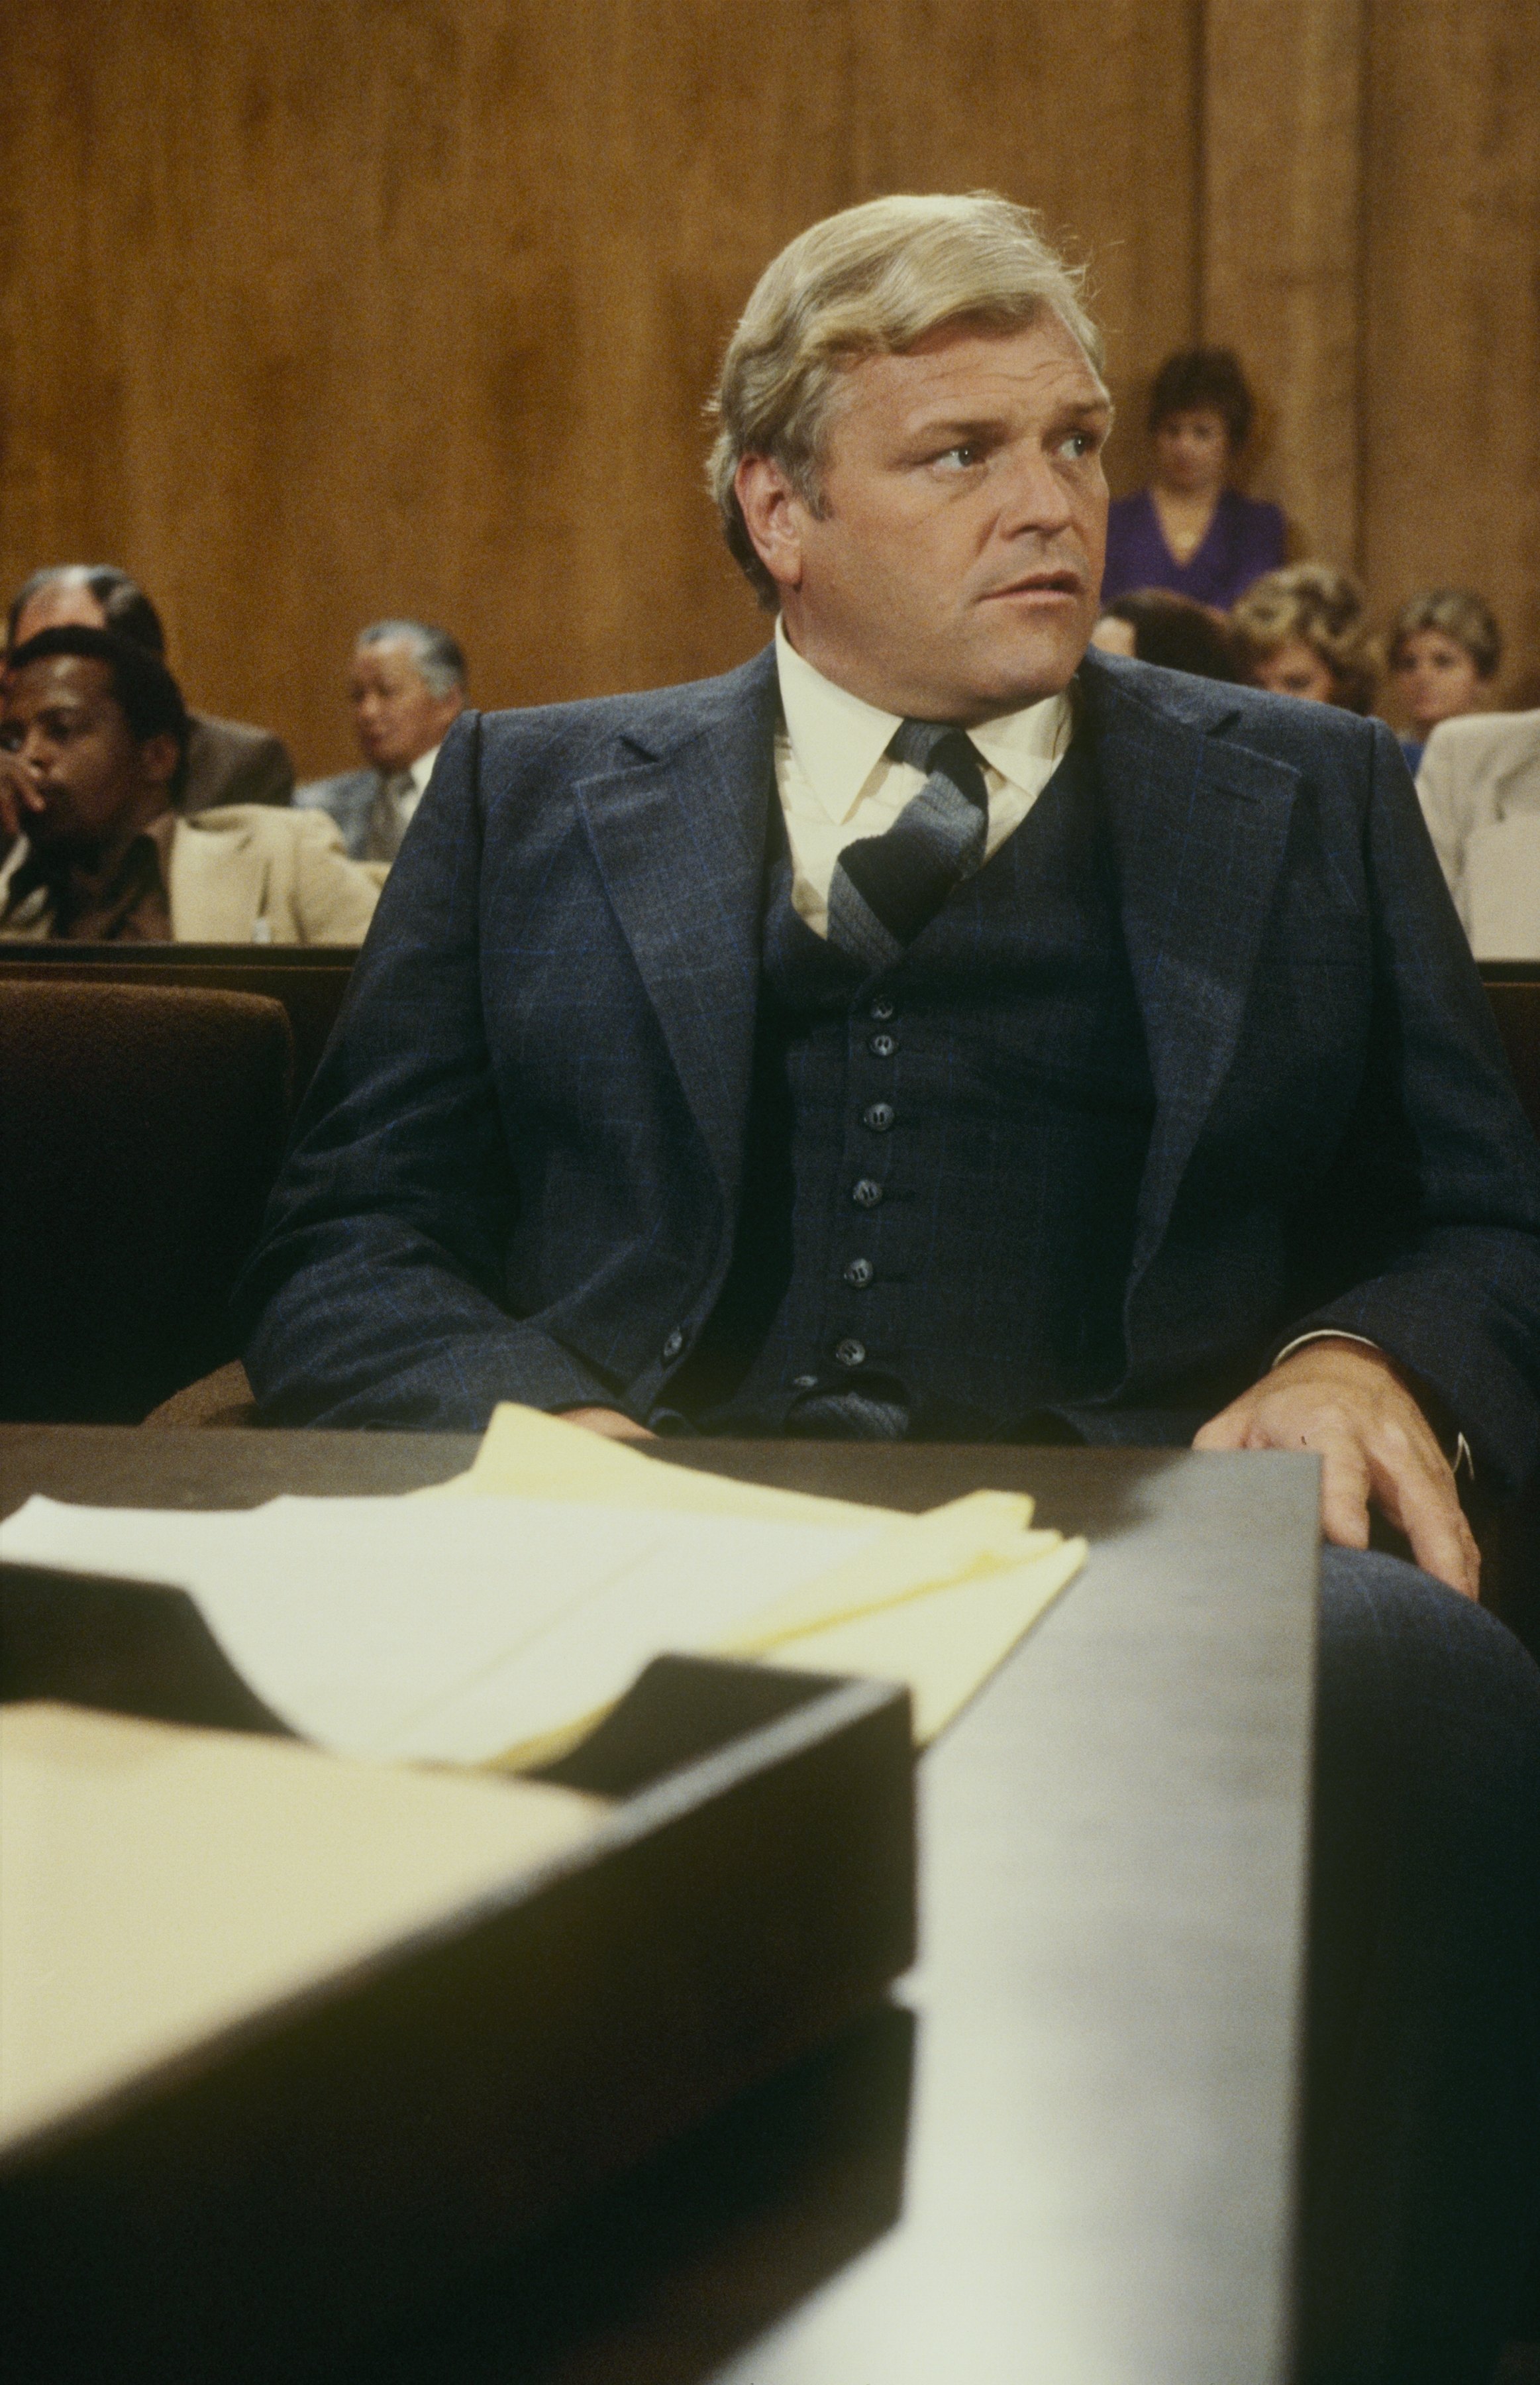 DYNASTY - "Enter Alexis" - Airdate November 4, 1981. (Photo by Walt Disney Television via Getty Images Photo Archives/Walt Disney Television via Getty Images) BRIAN DENNEHY